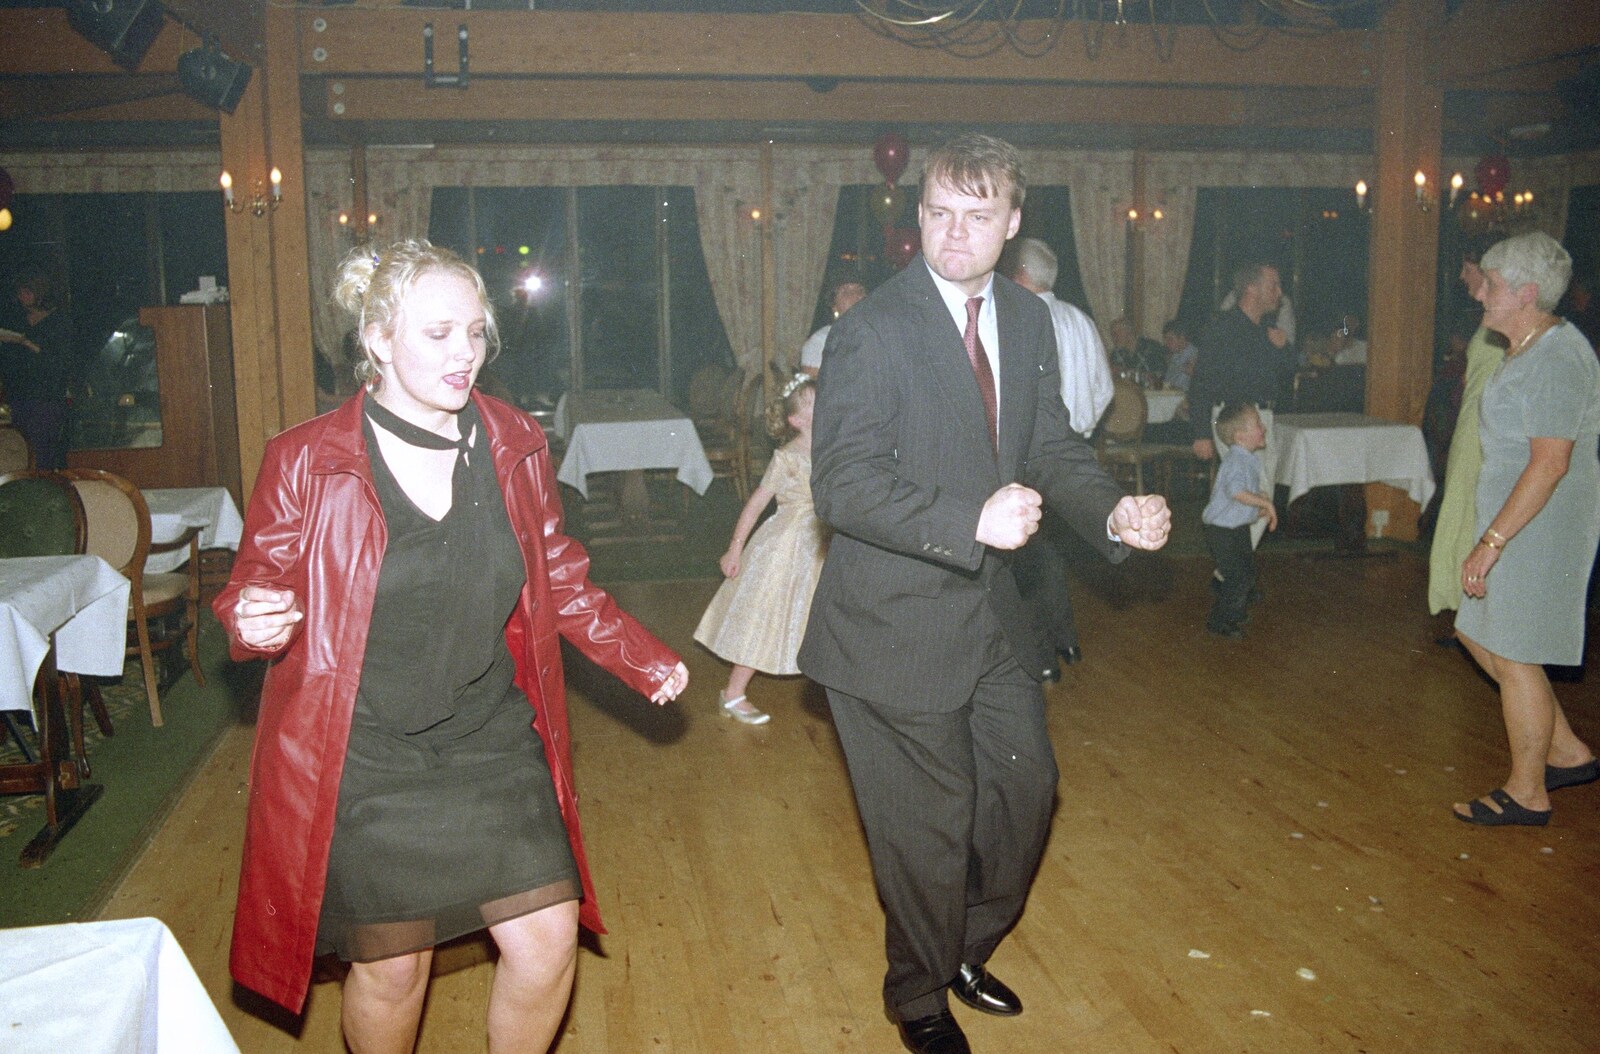 Michelle and Nick do some bopping from Paula's 3G Lab Wedding Reception, Huntingdon, Cambridgeshire - 4th September 2000